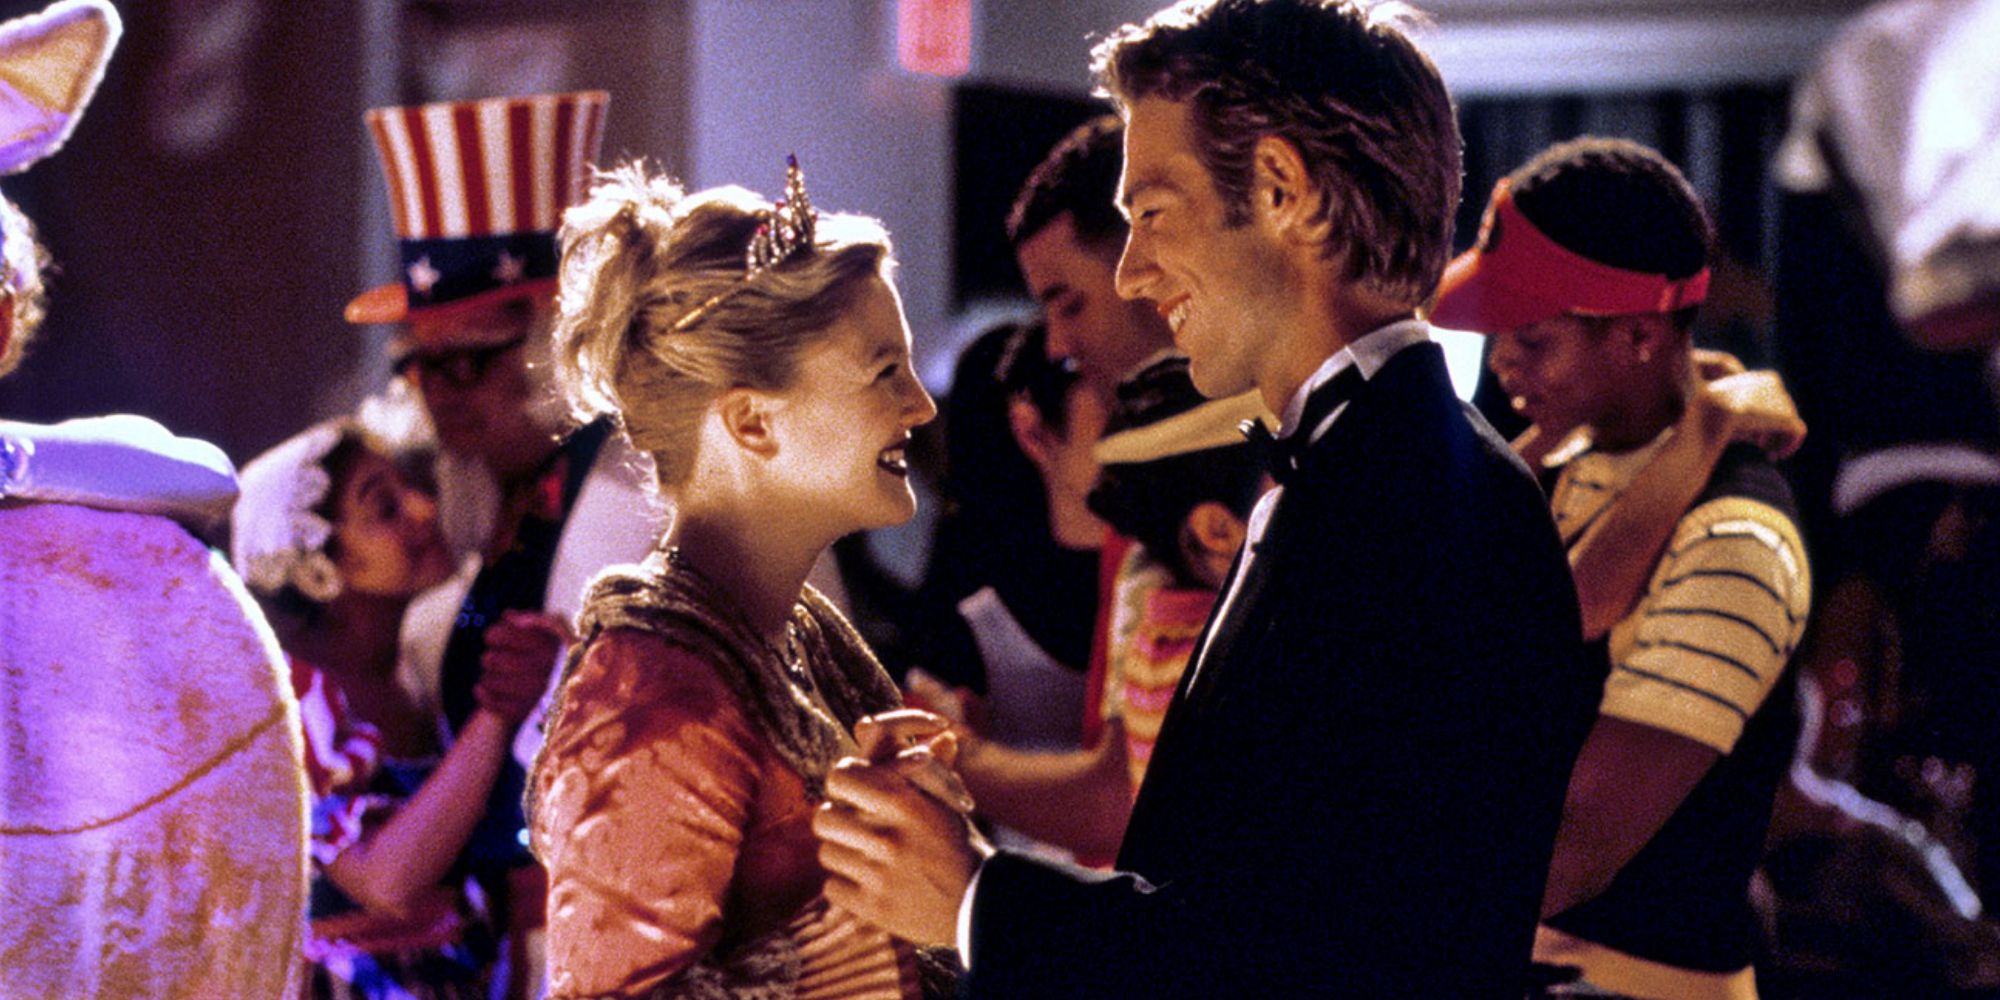 Josie and her teacher dancing at Prom in Never Been Kissed.